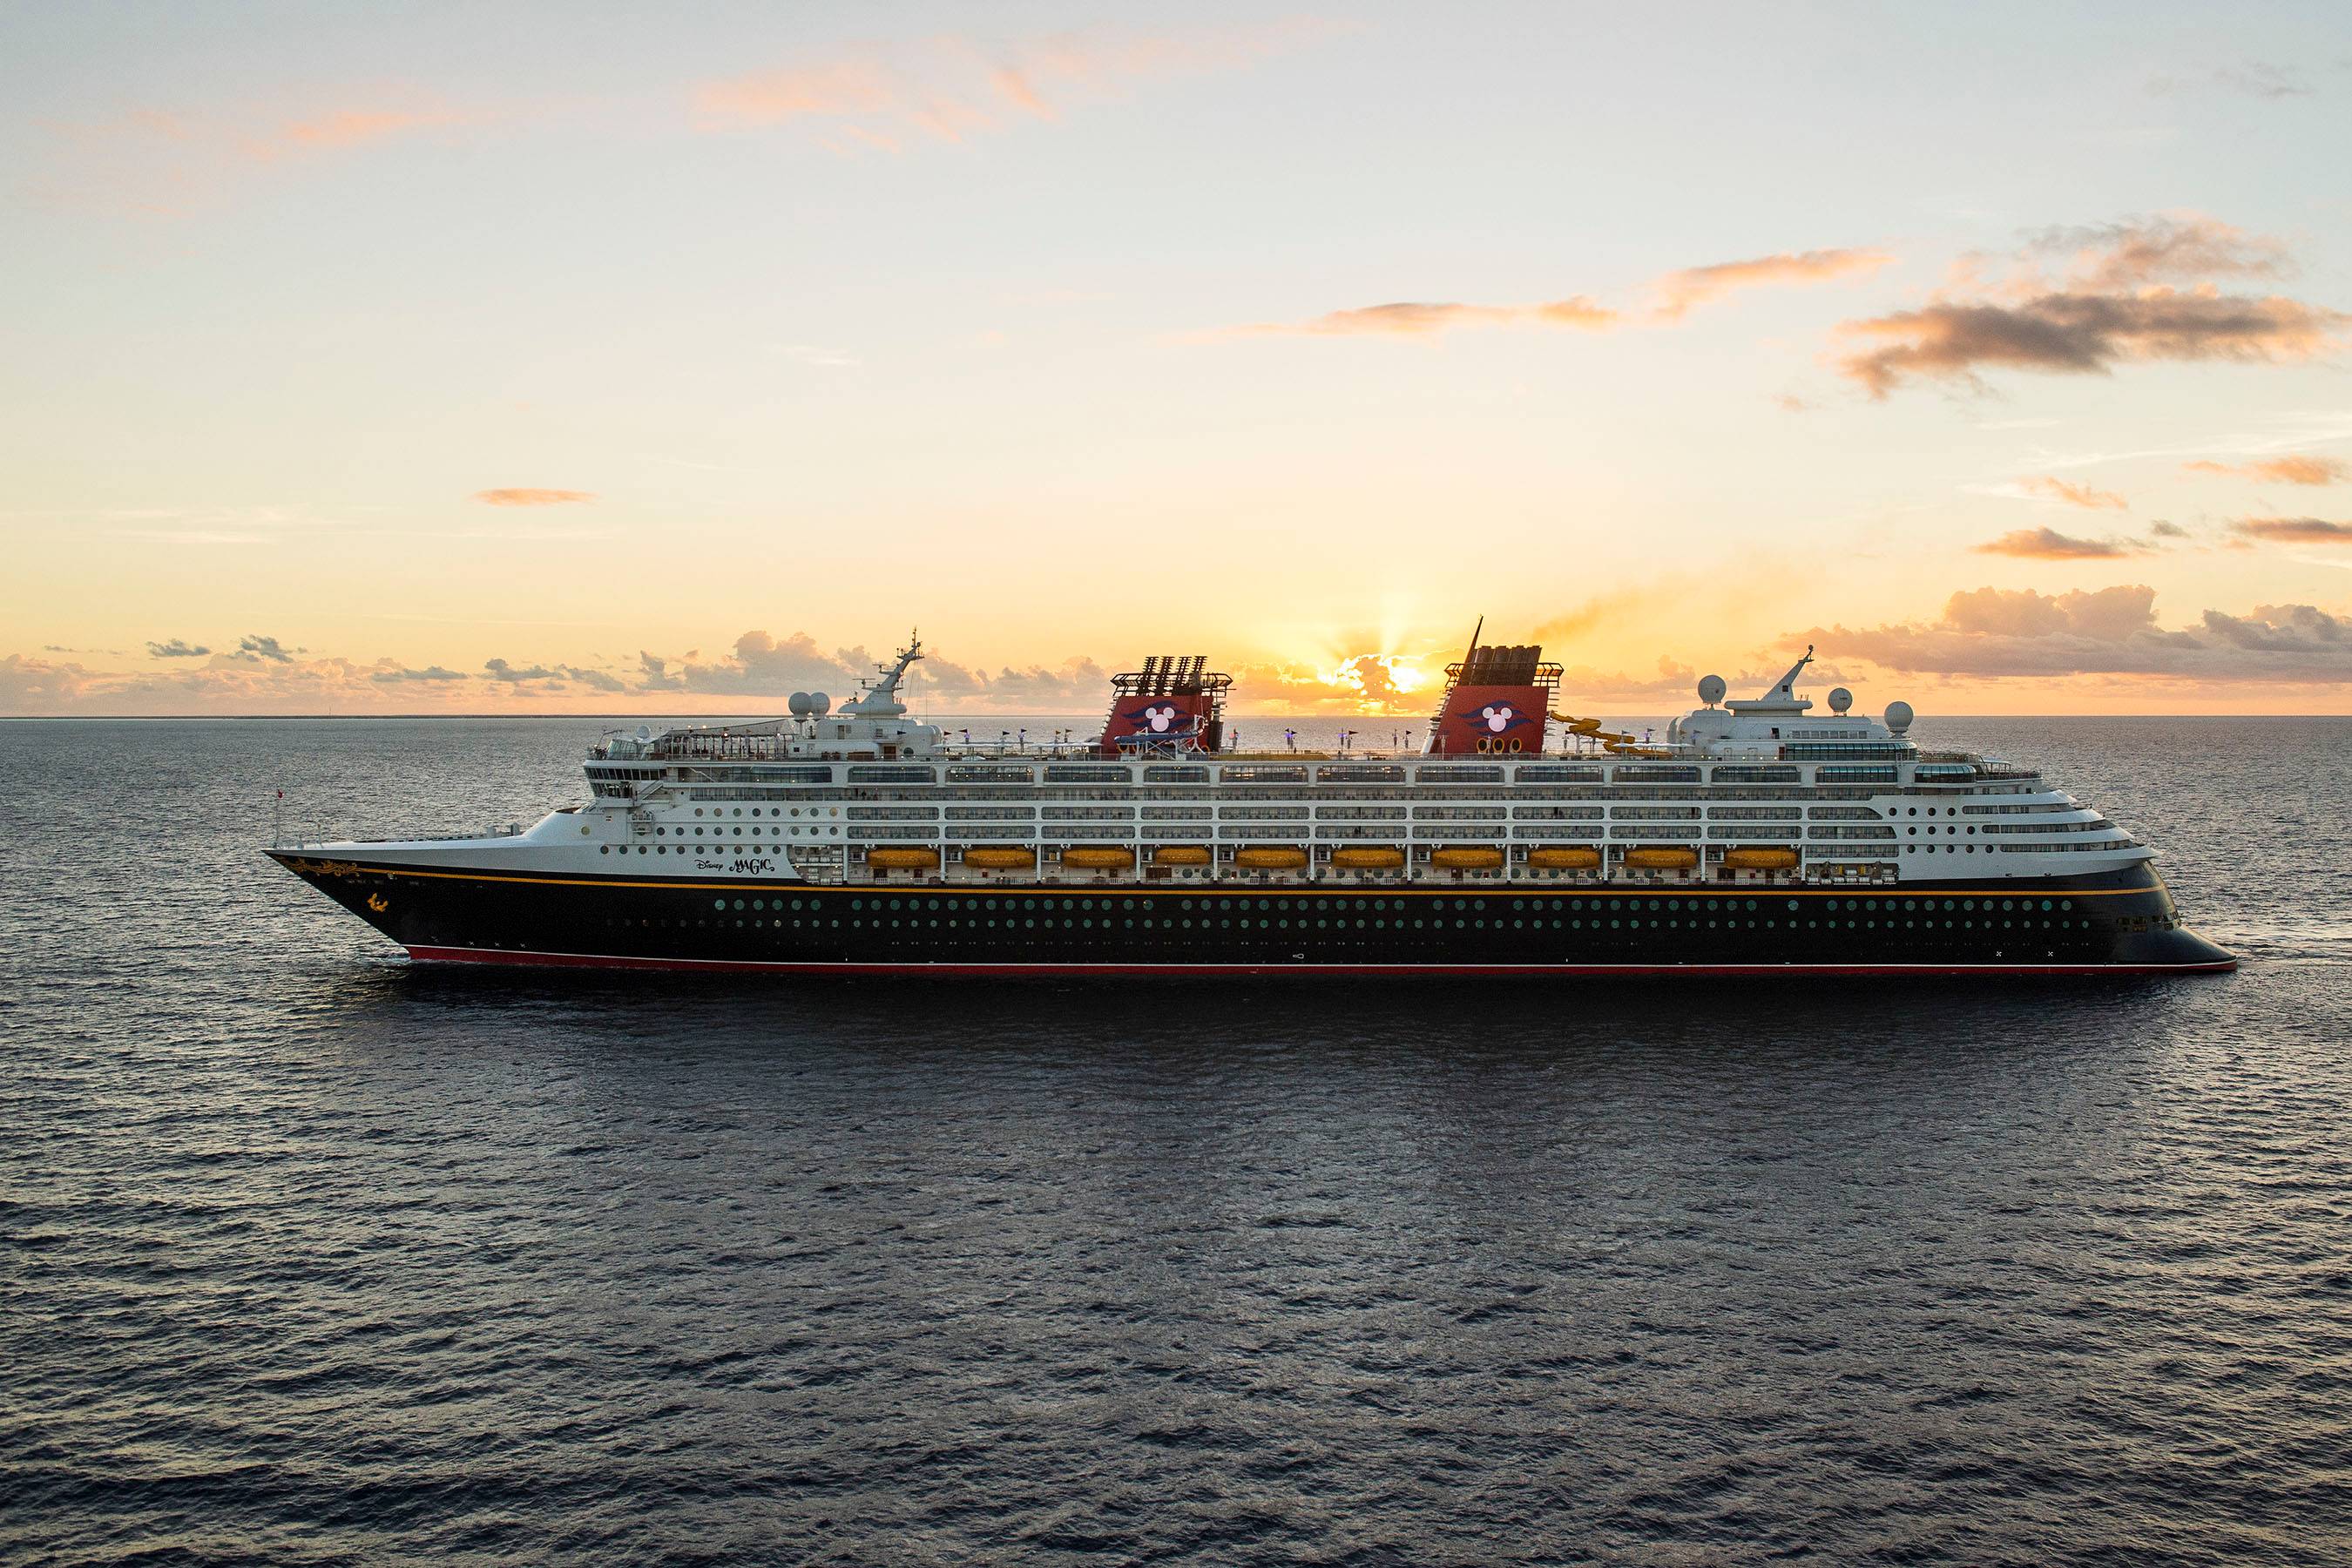 Special Offer for Disney+ Subscribers with Disney Cruise Line